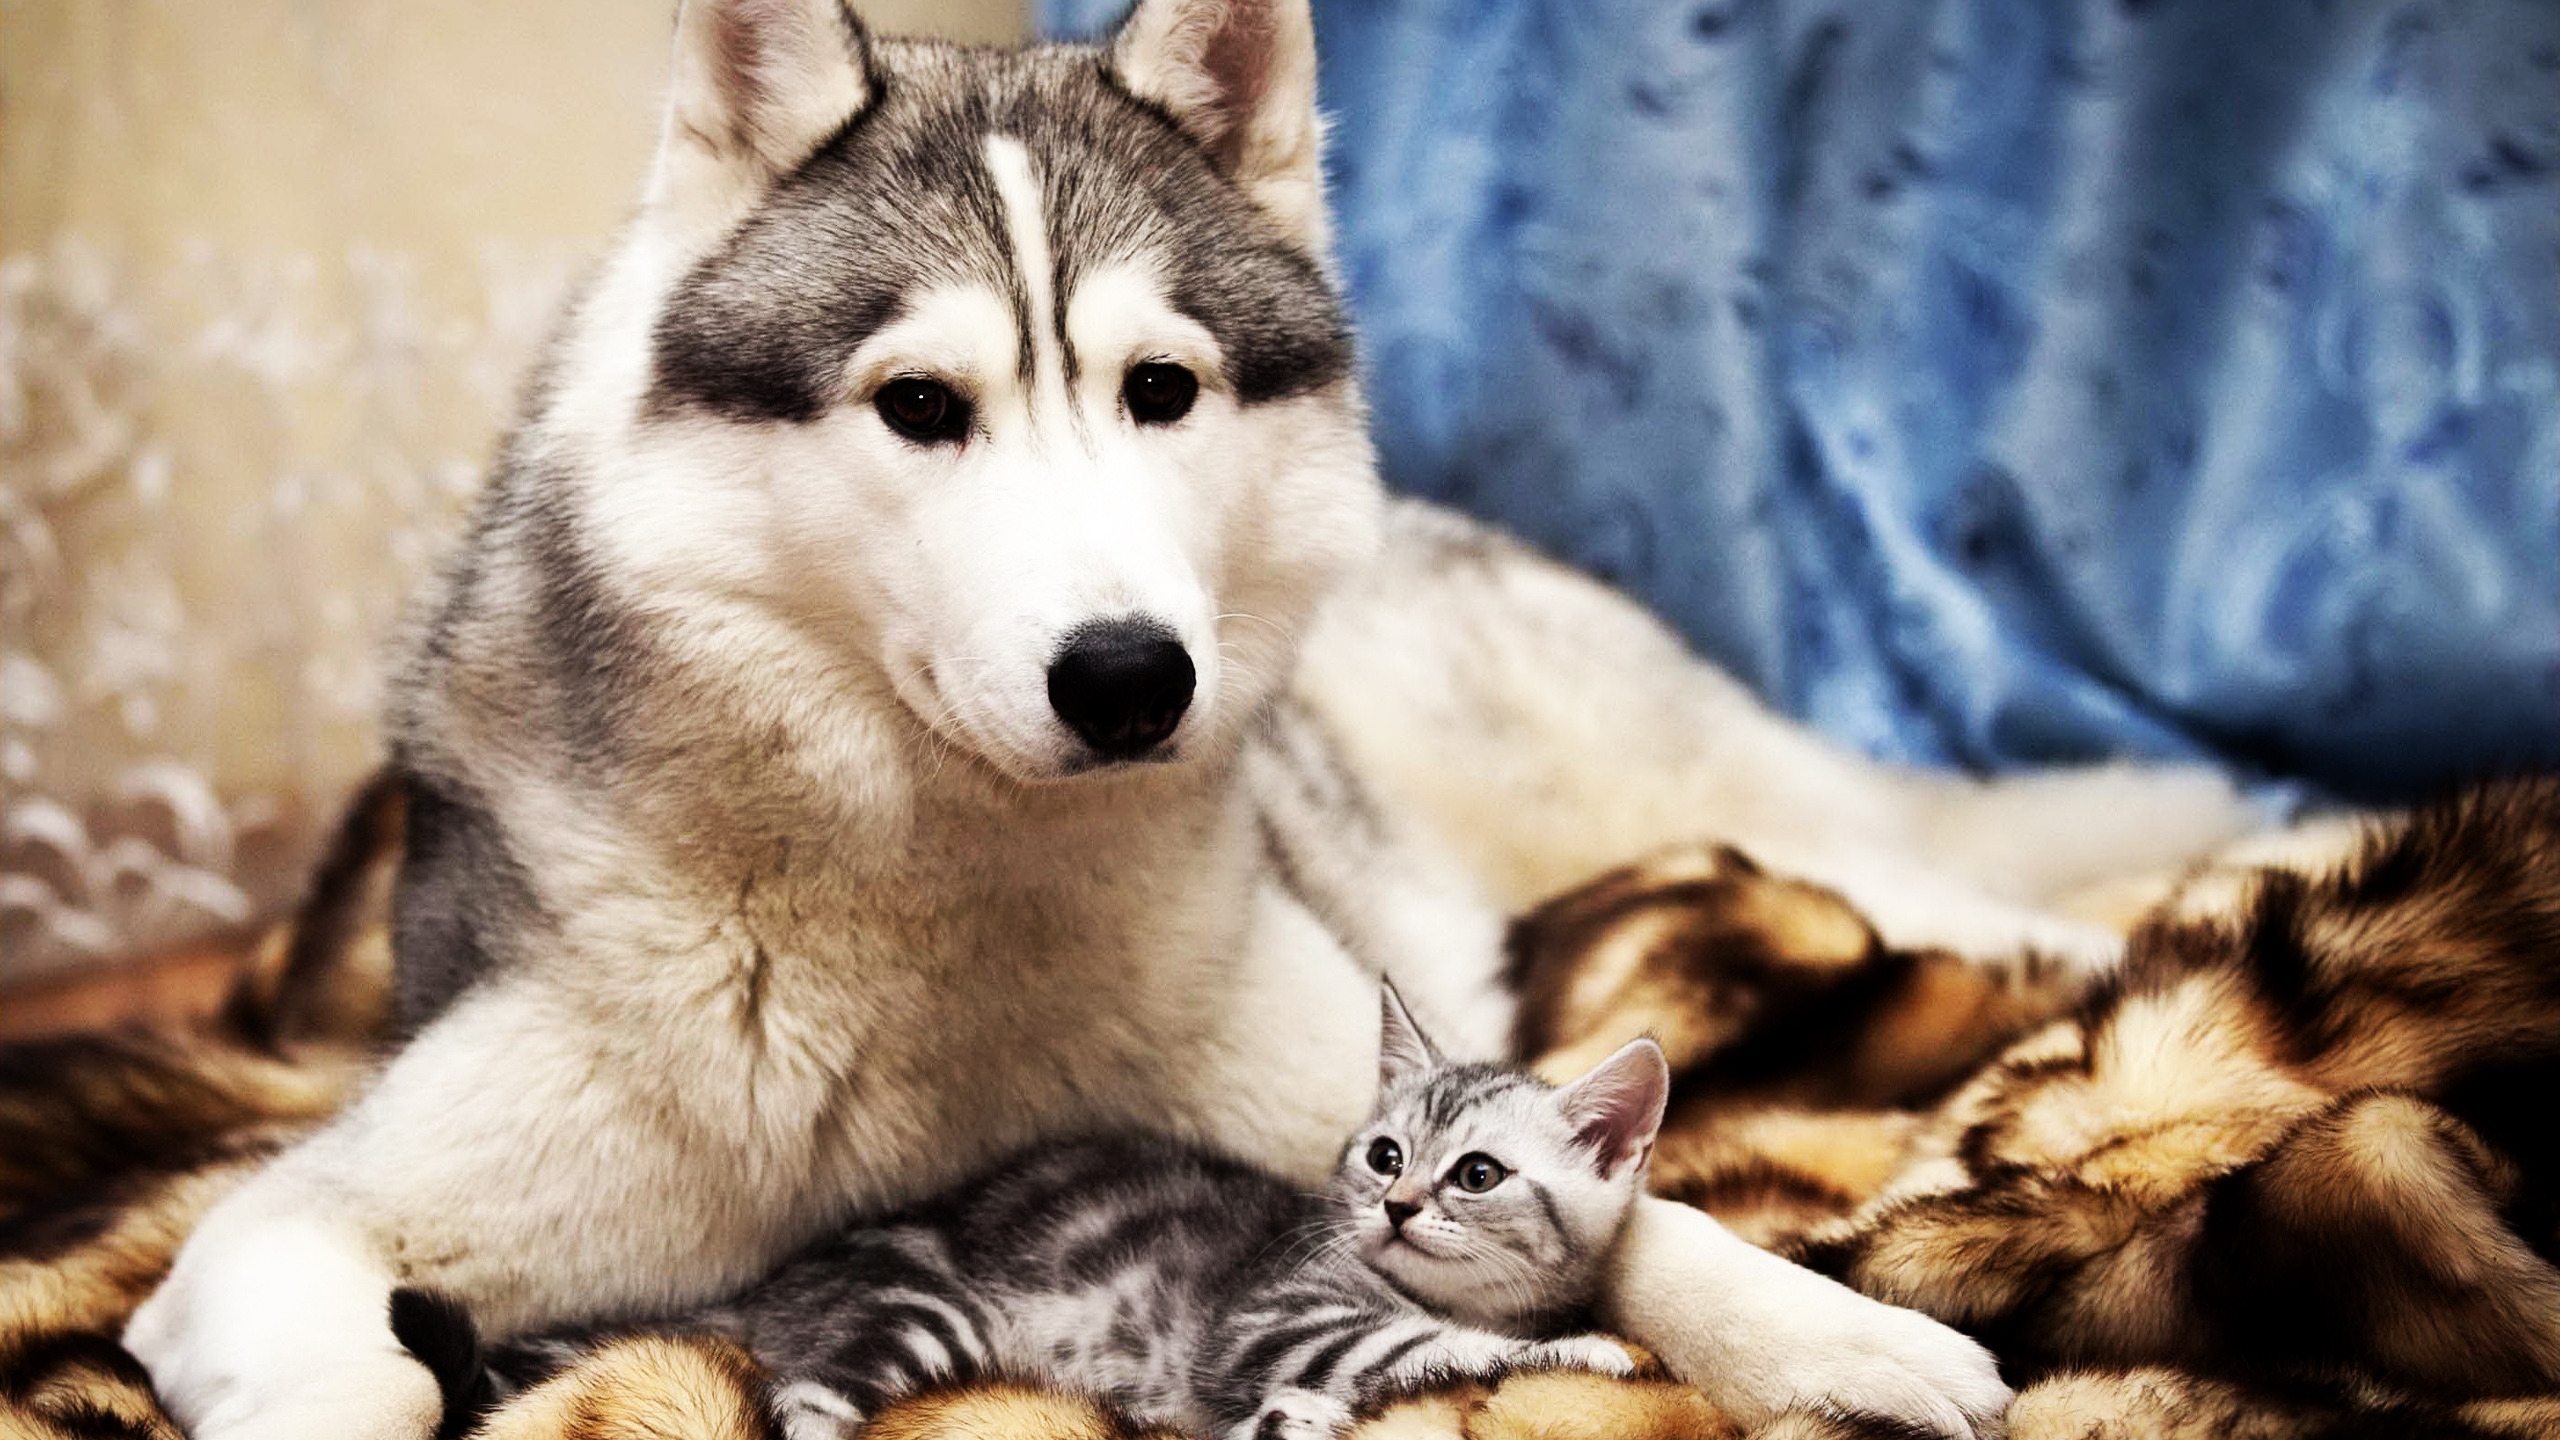 Dog and Cat Friends for 2560x1440 HDTV resolution